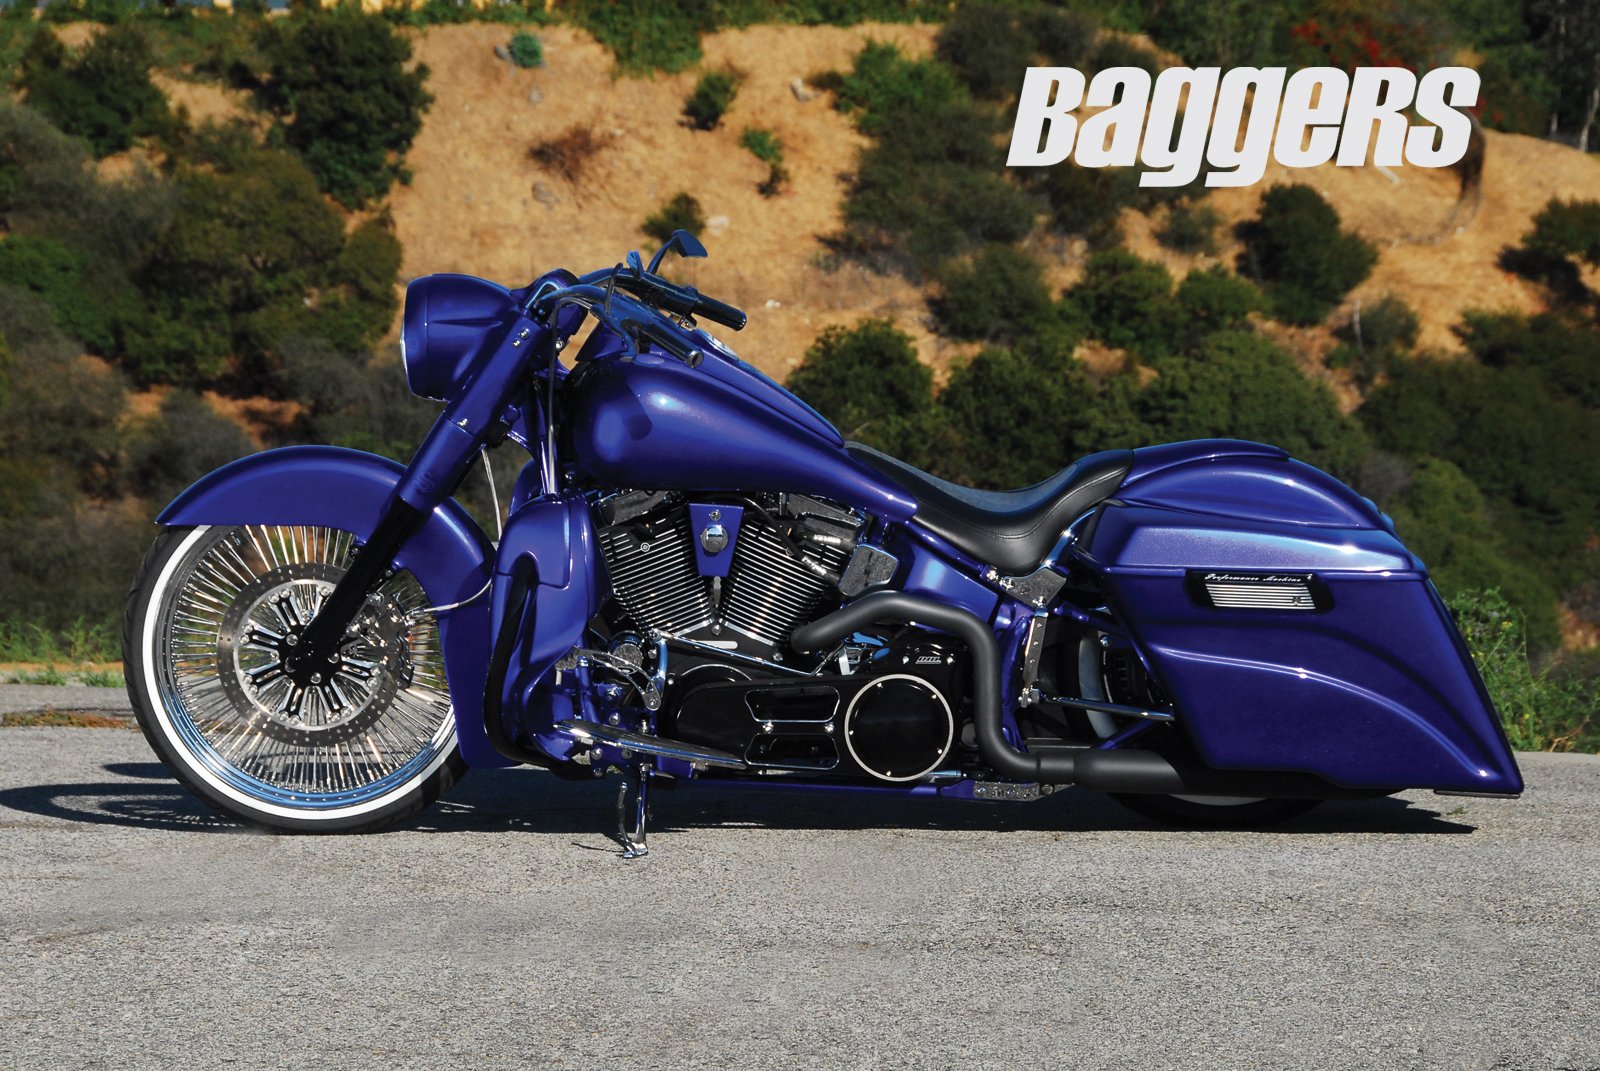 Harley-Davidson Softail Deluxe Wallpapers